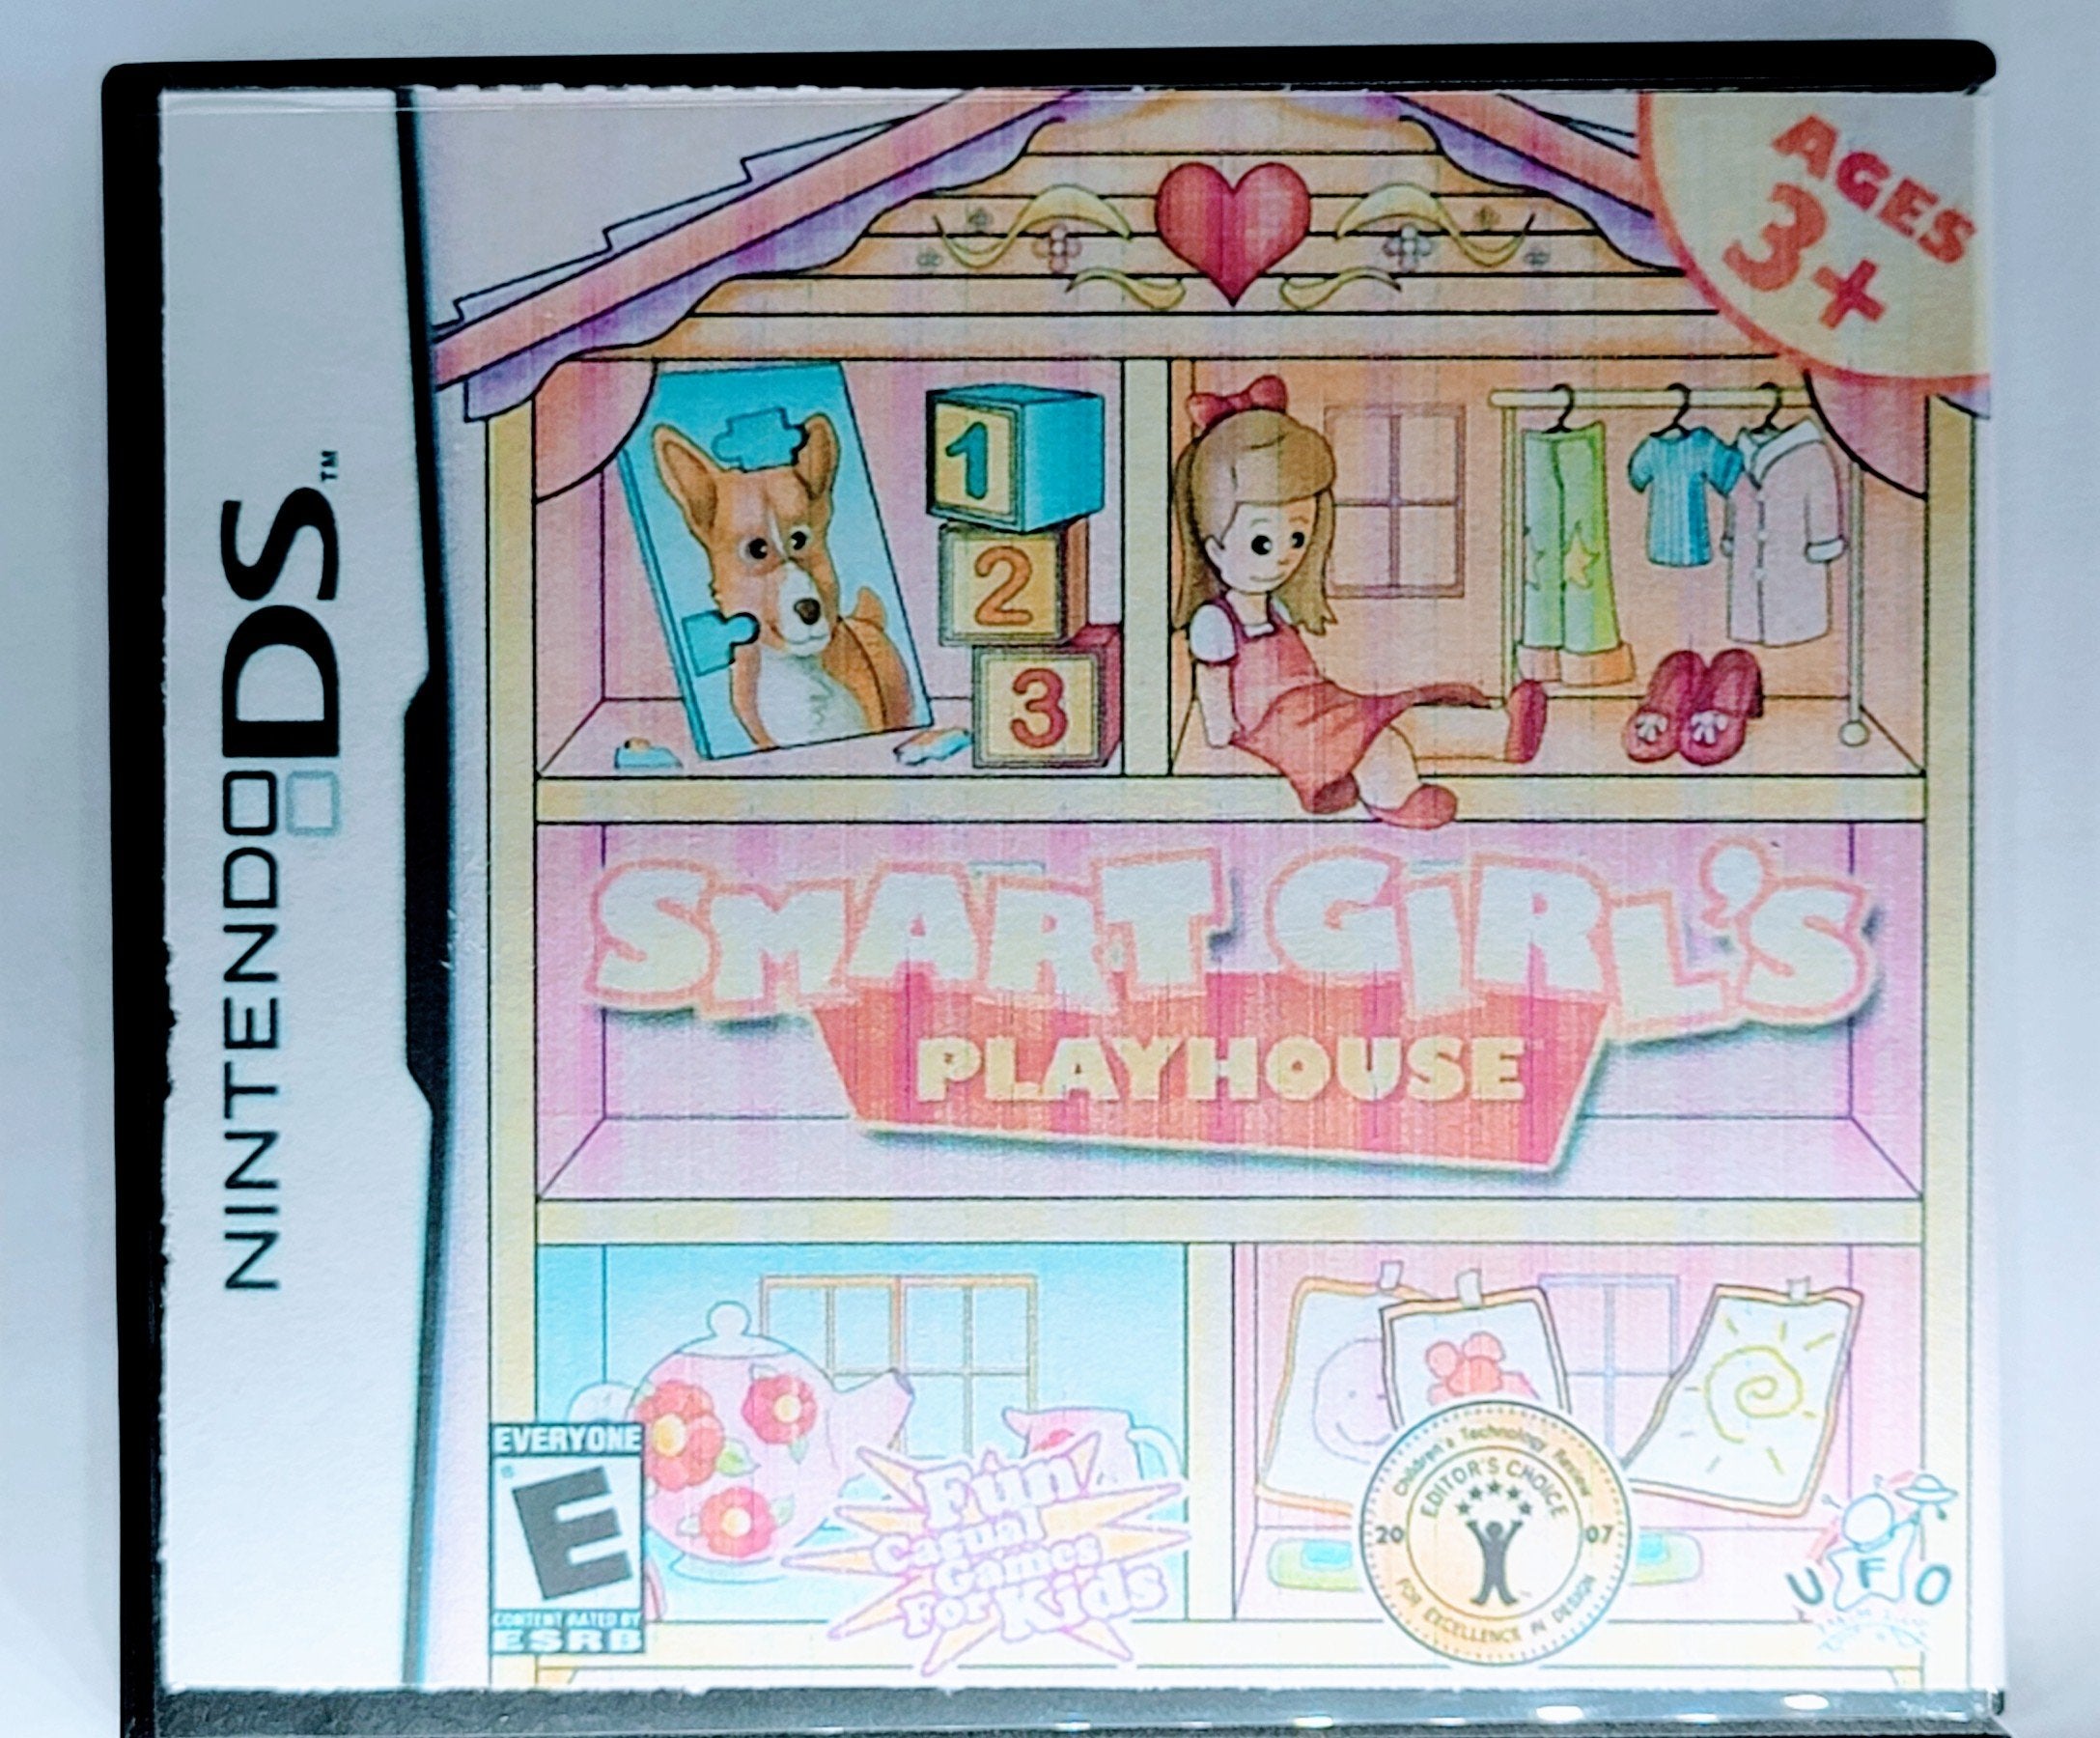 Smart Girl's: Playhouse (Nintendo DS, 2007): Learn and Have Fun!  Xclusive Collectibles   